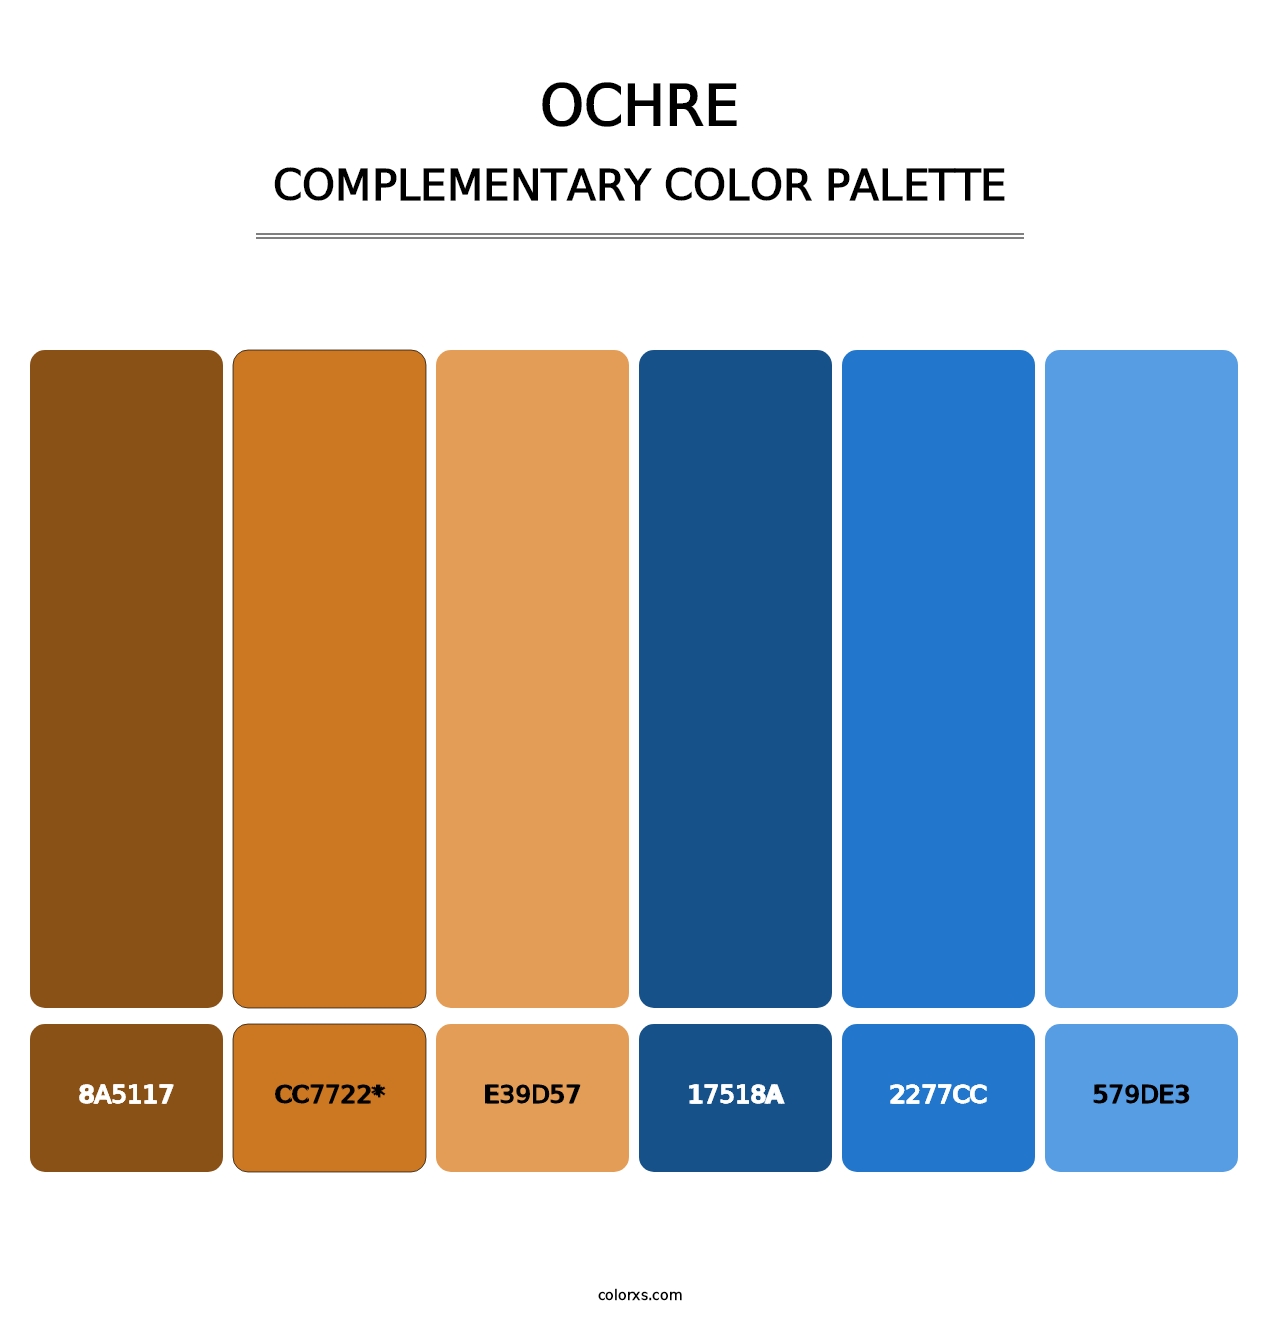 Ochre - Complementary Color Palette